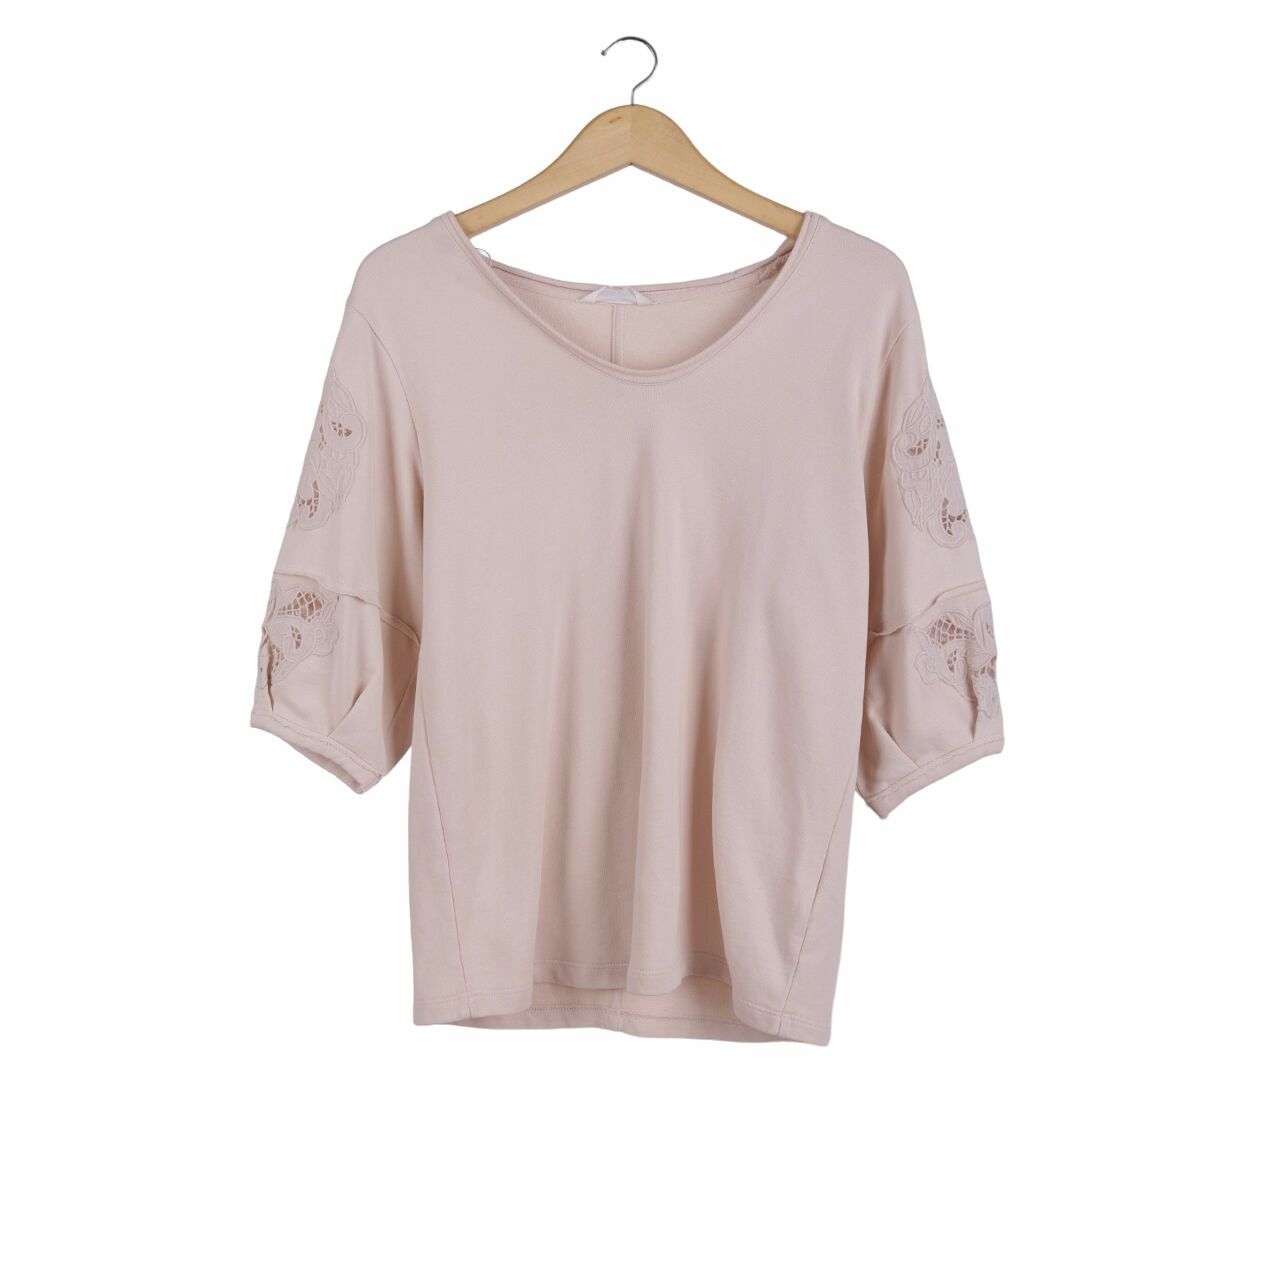 Marks & Spencer by Per Una Soft Pink Blouse